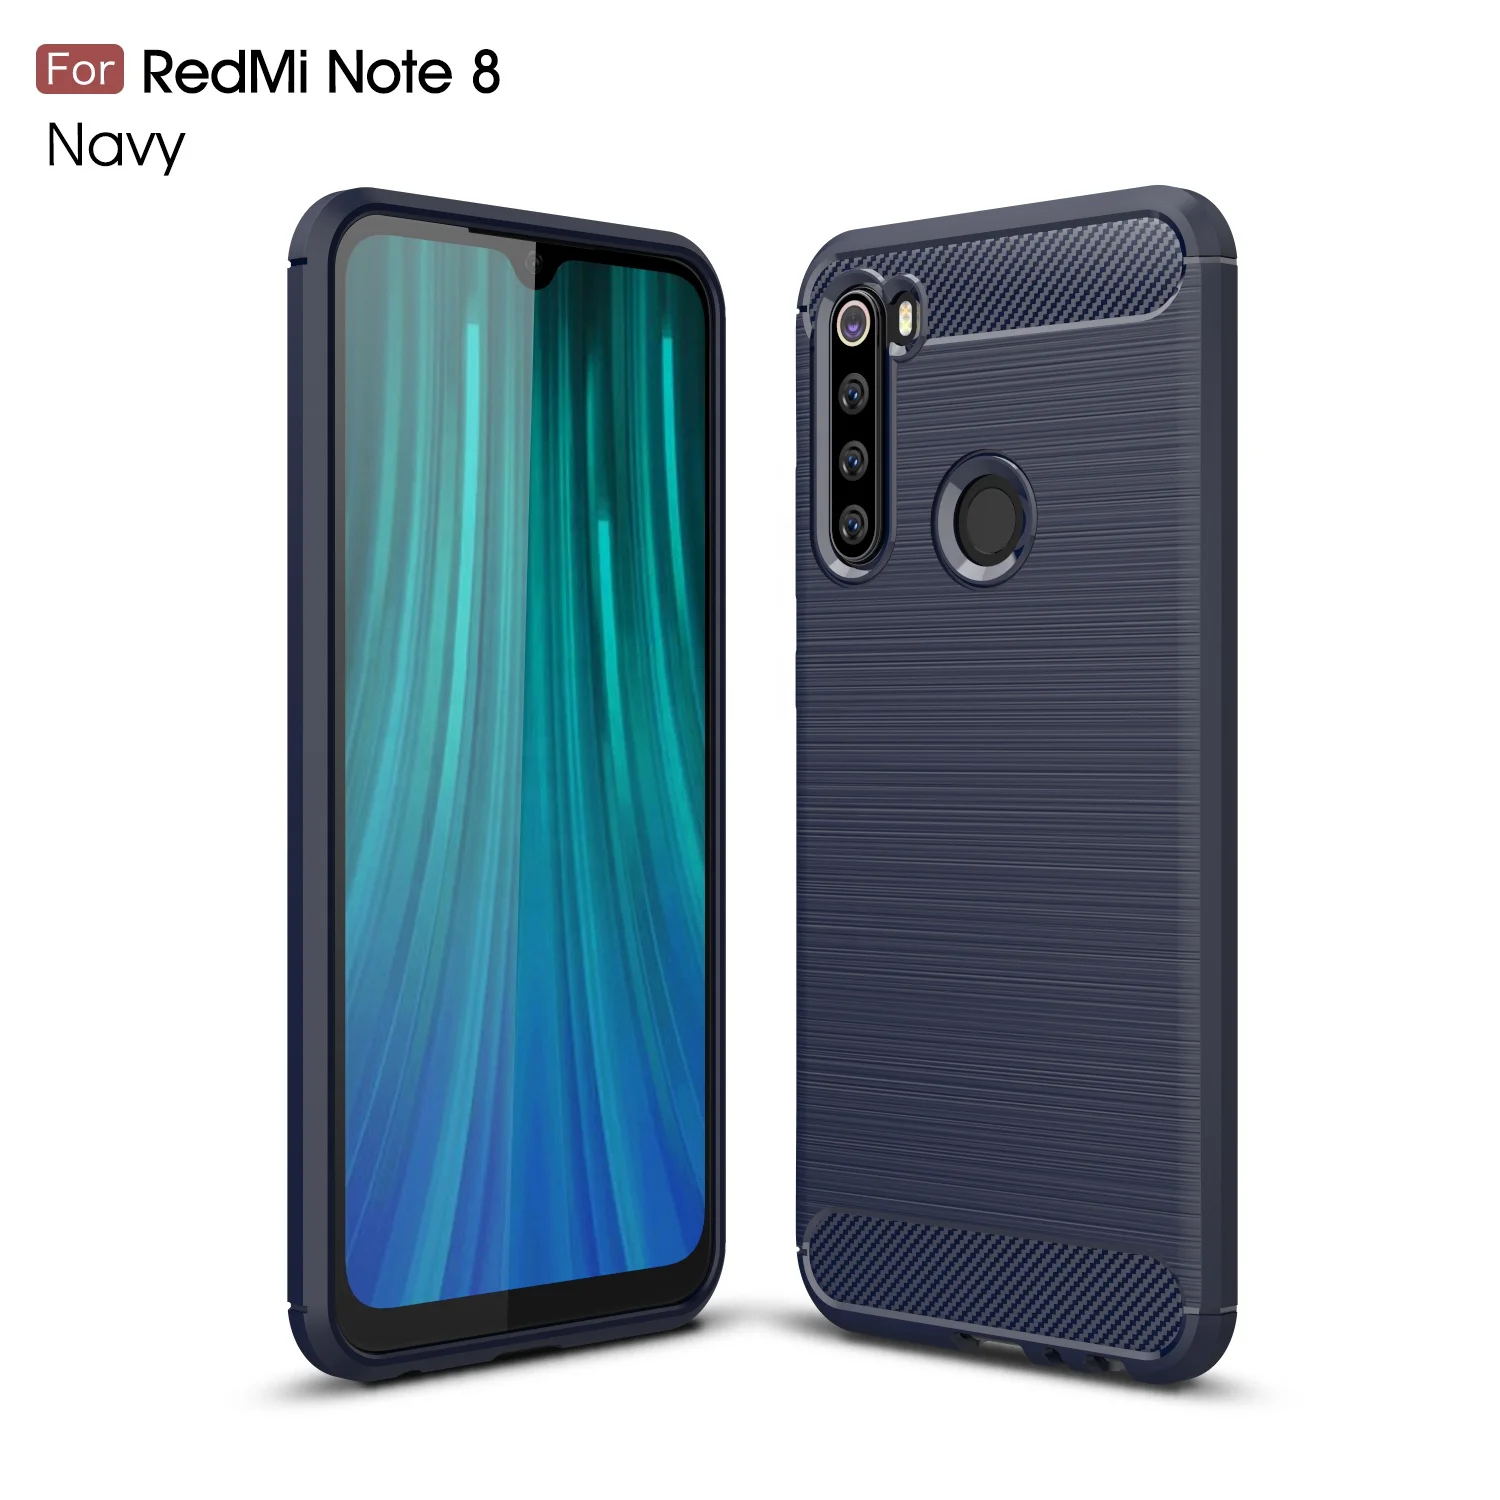 

Carbon Fiber Soft TPU Brushed Anti Fingerprint Full Protective Phone Case Cover For Redmi note 8, Multi-color, can be customized